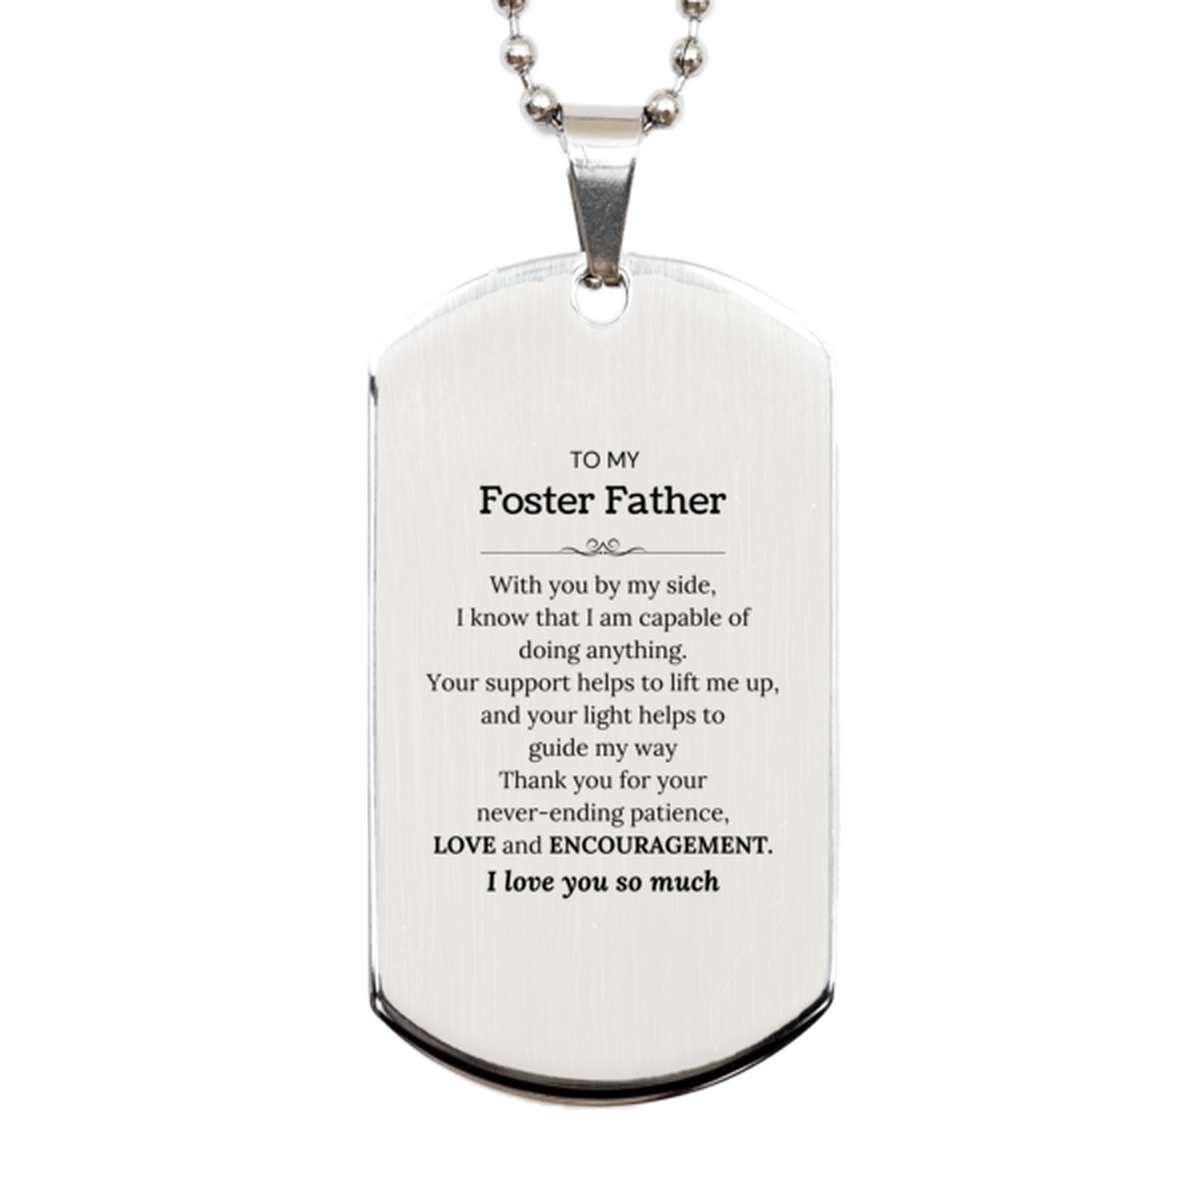 Appreciation Foster Father Silver Dog Tag Gifts, To My Foster Father Birthday Christmas Wedding Keepsake Gifts for Foster Father With you by my side, I know that I am capable of doing anything. I love you so much